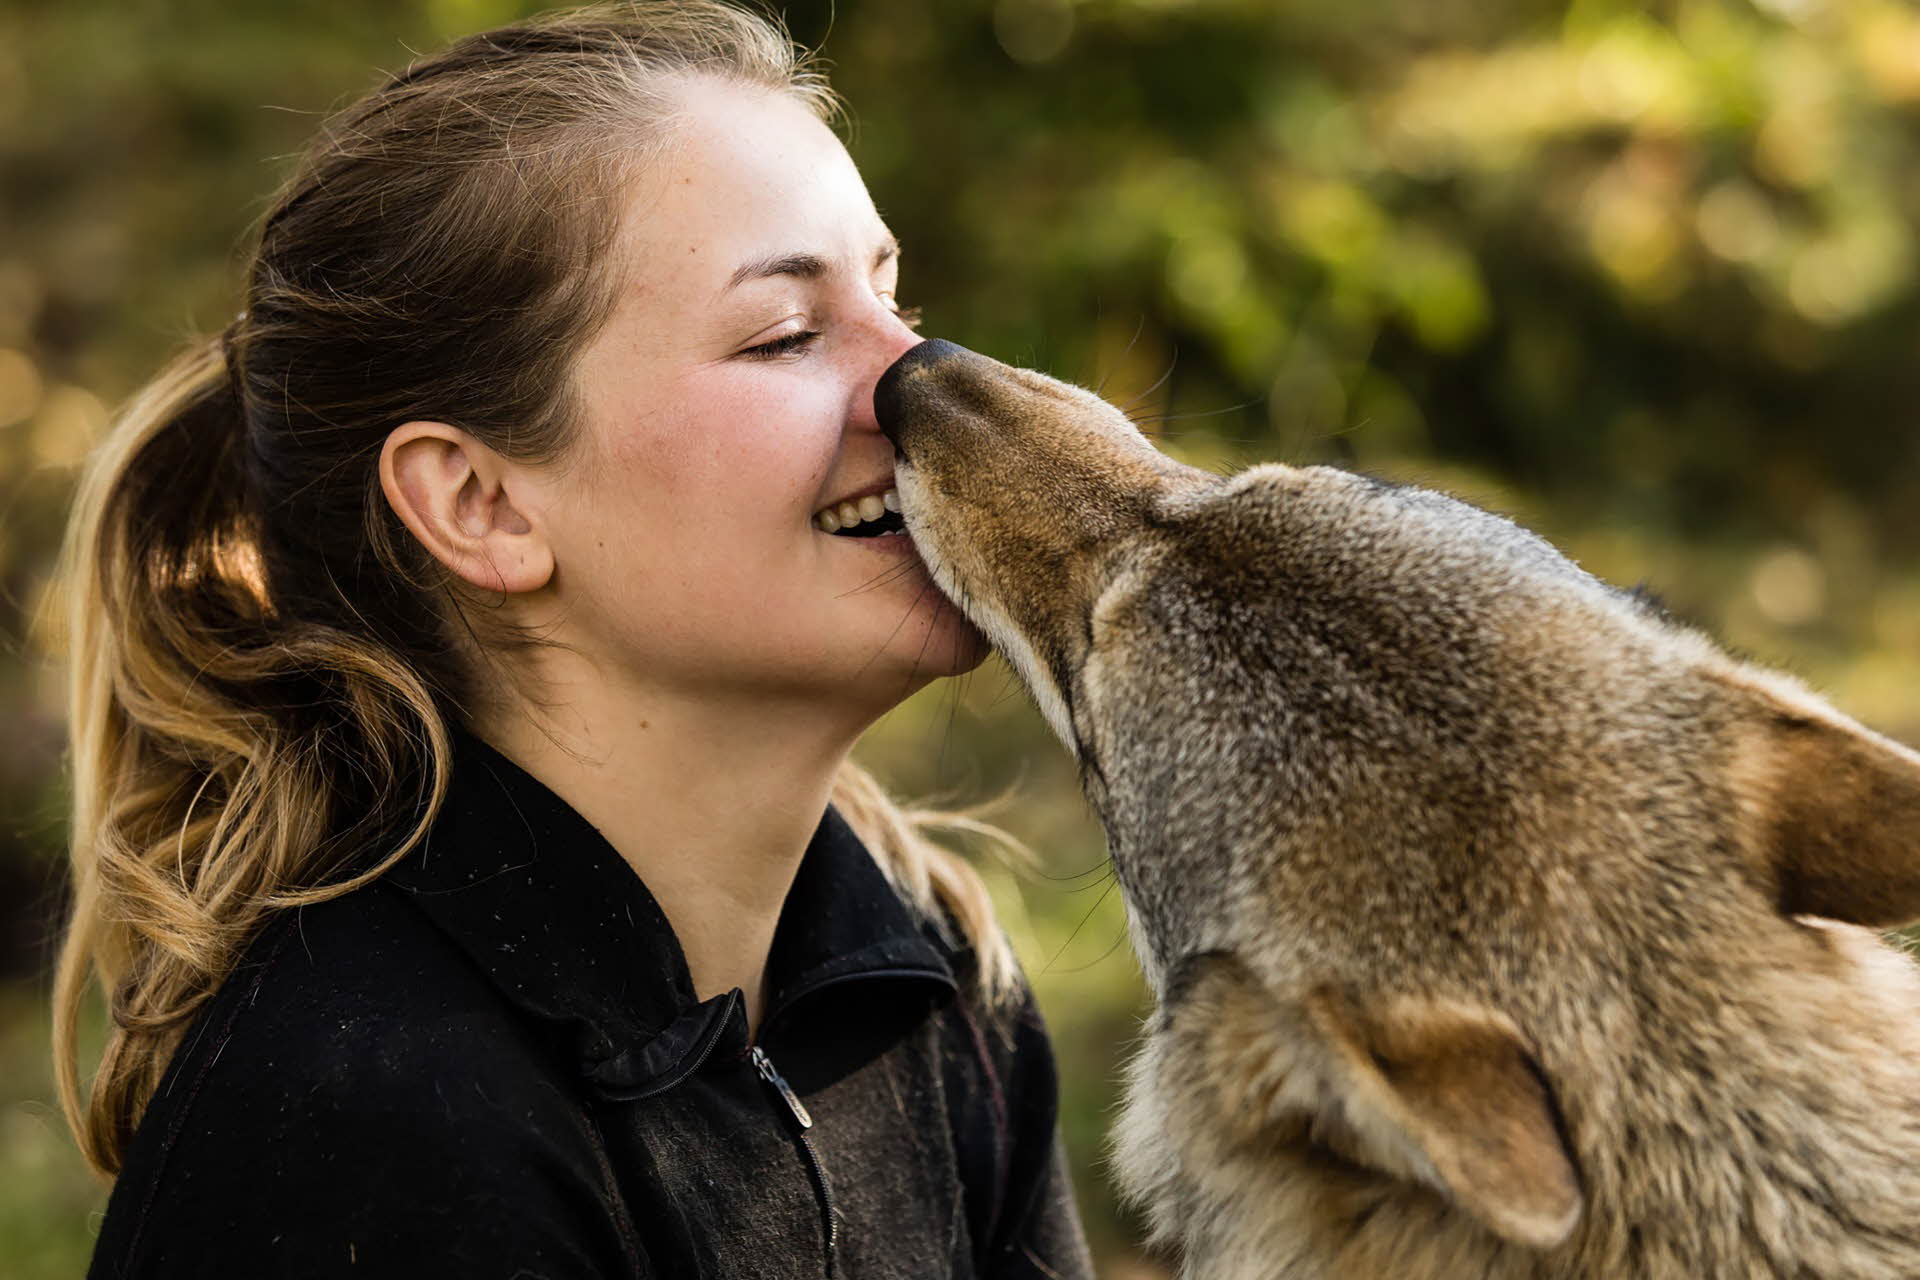 A woman with a pony tail smiles as a wolf licks her face. 